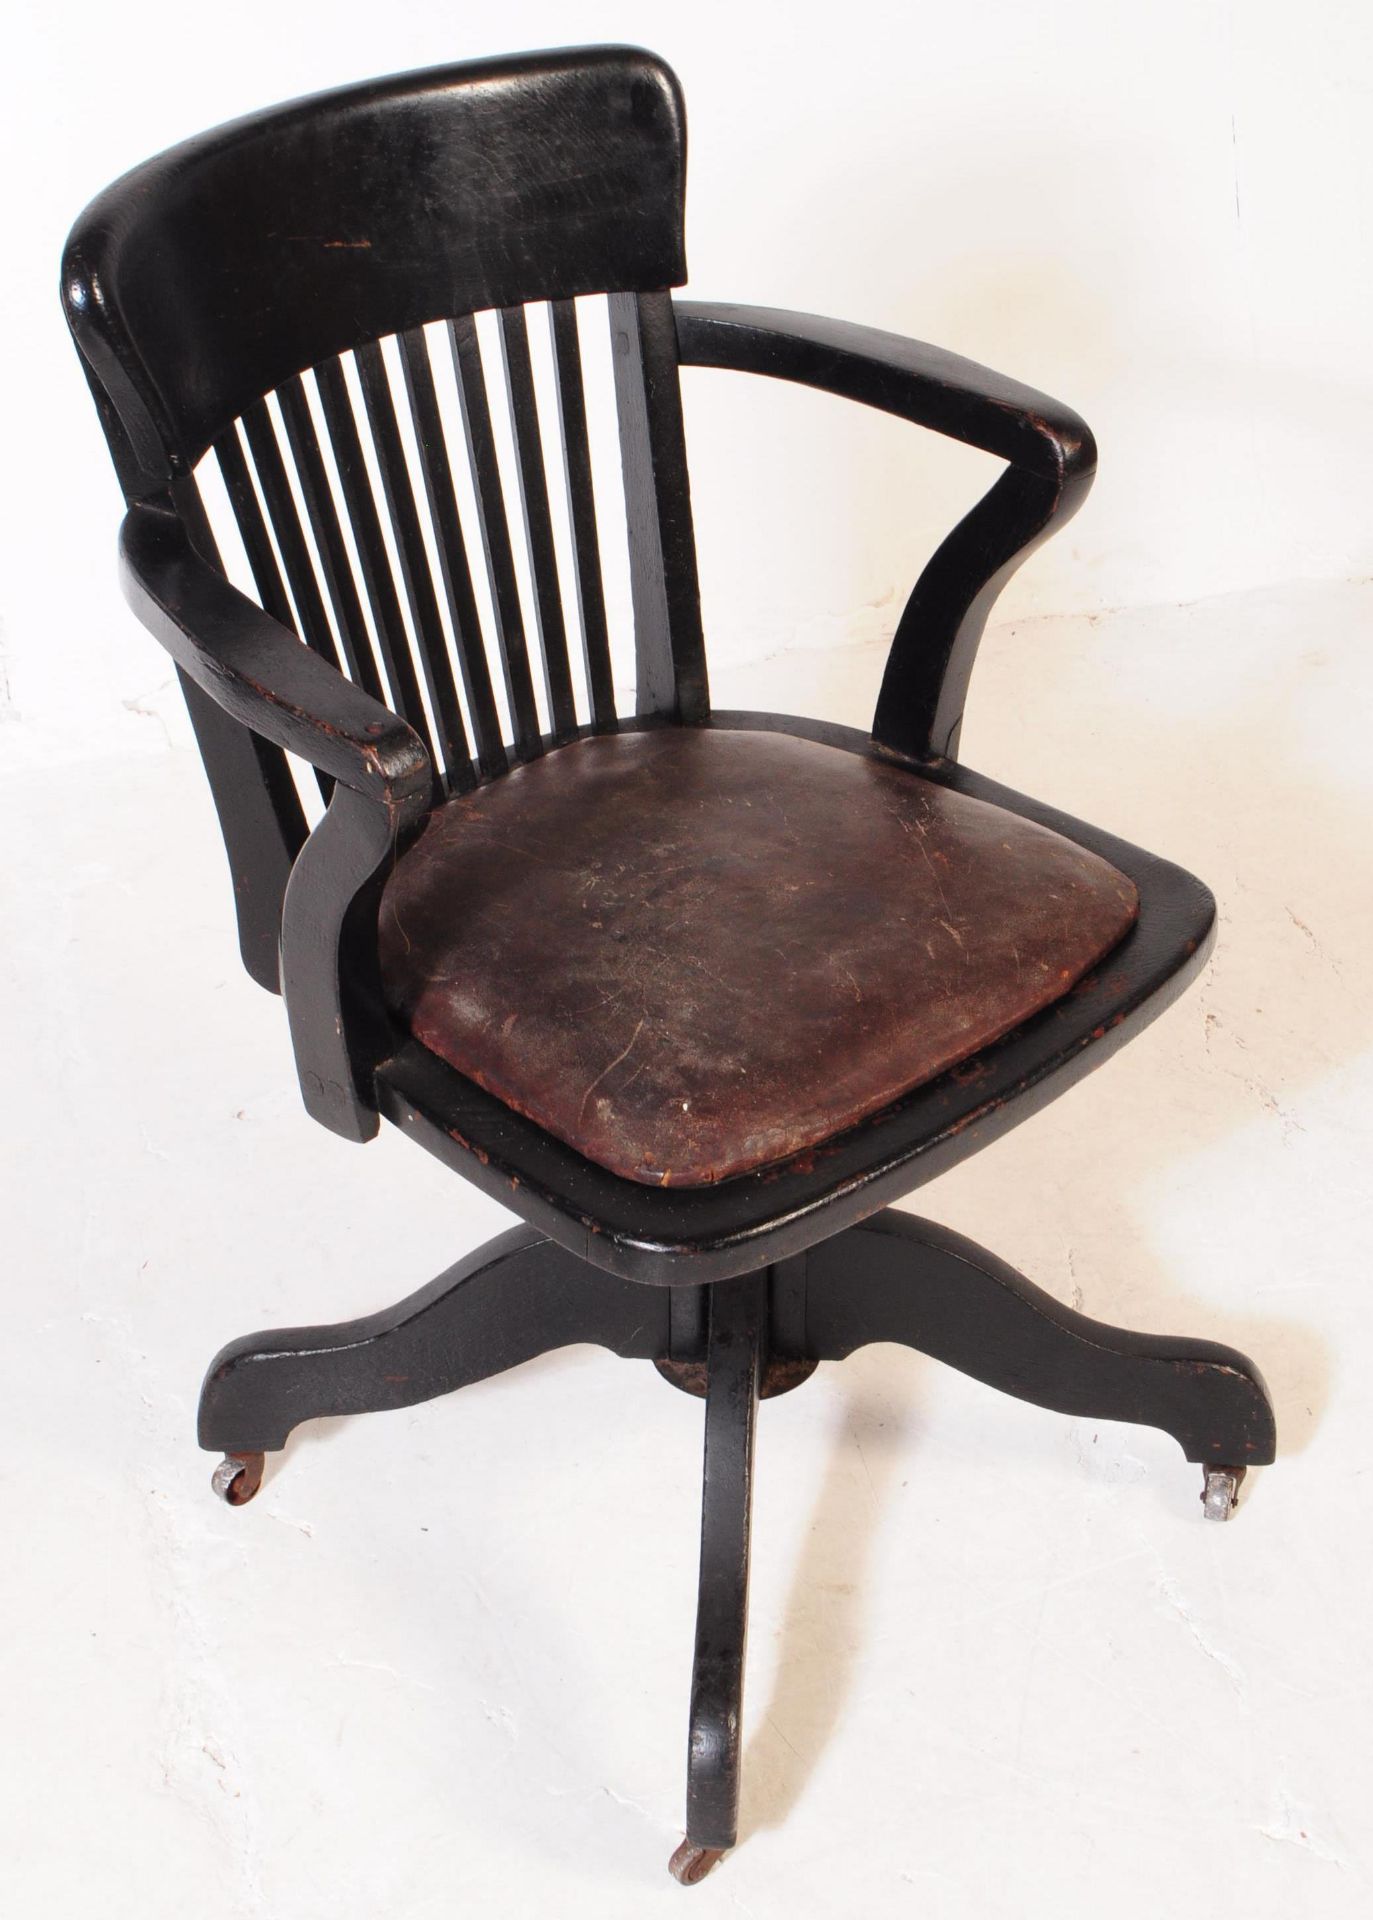 EARLY 20TH CENTURY SWIVEL DESK CHAIR - Image 2 of 7